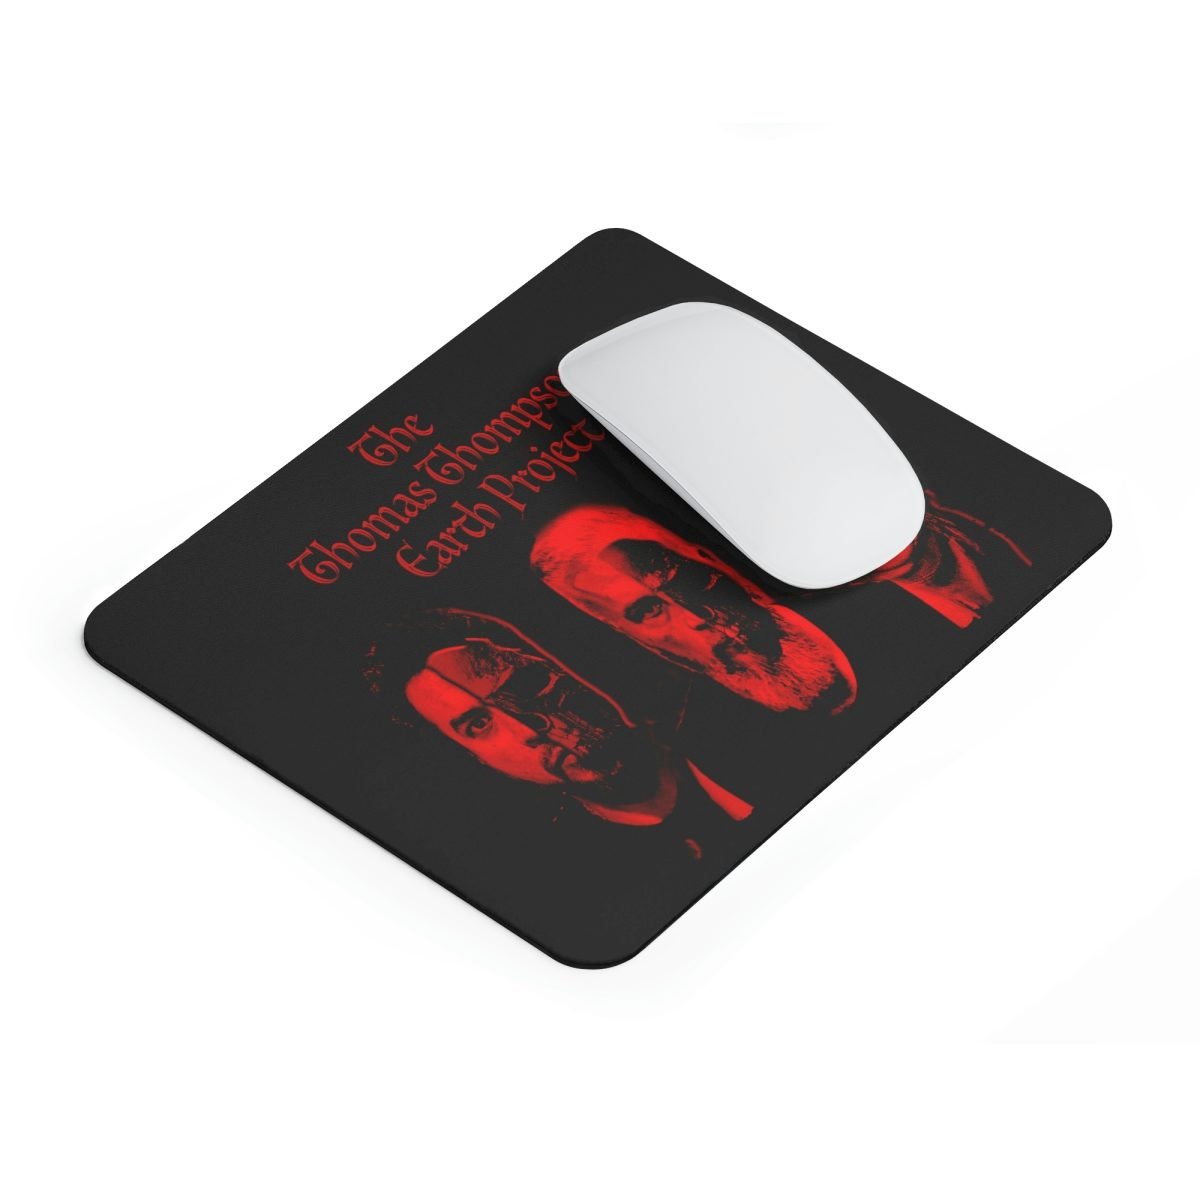 The Thomas Thompson Earth Project Bloodskulls Mouse Pad